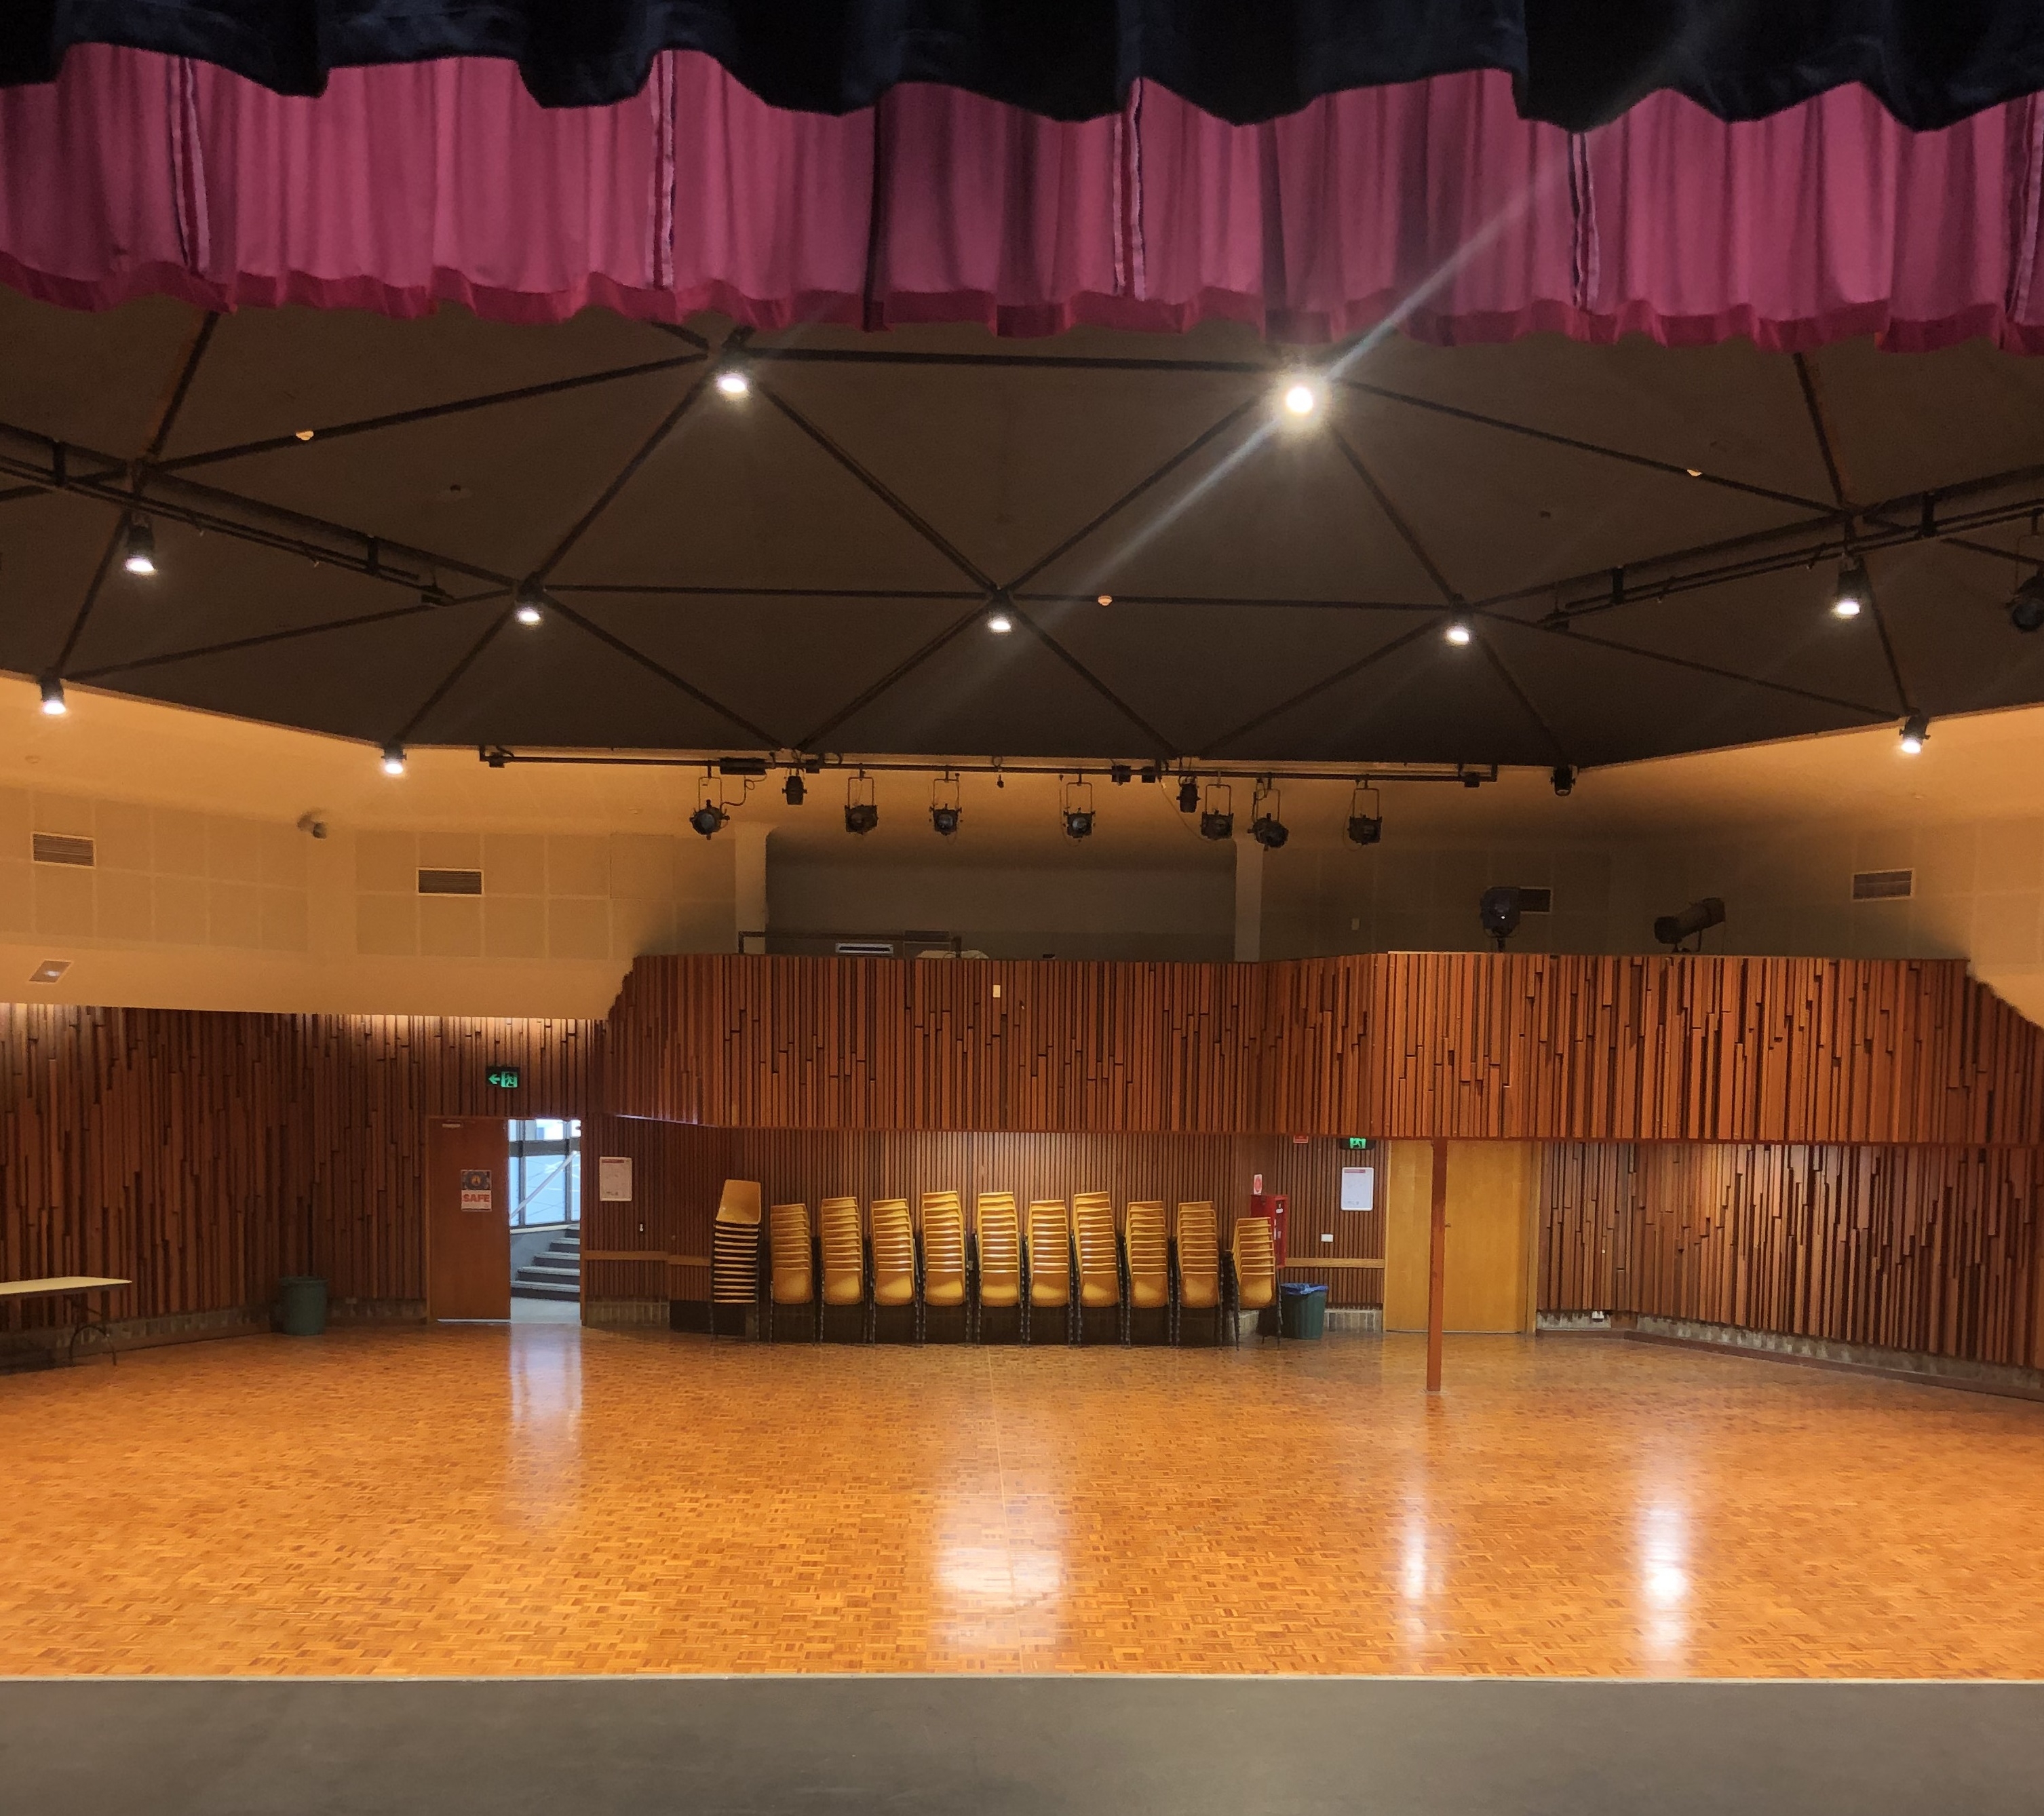 It’s a long way from 1973 to 2019 - Tweed Heads Civic and Cultural Centre updates Main Image